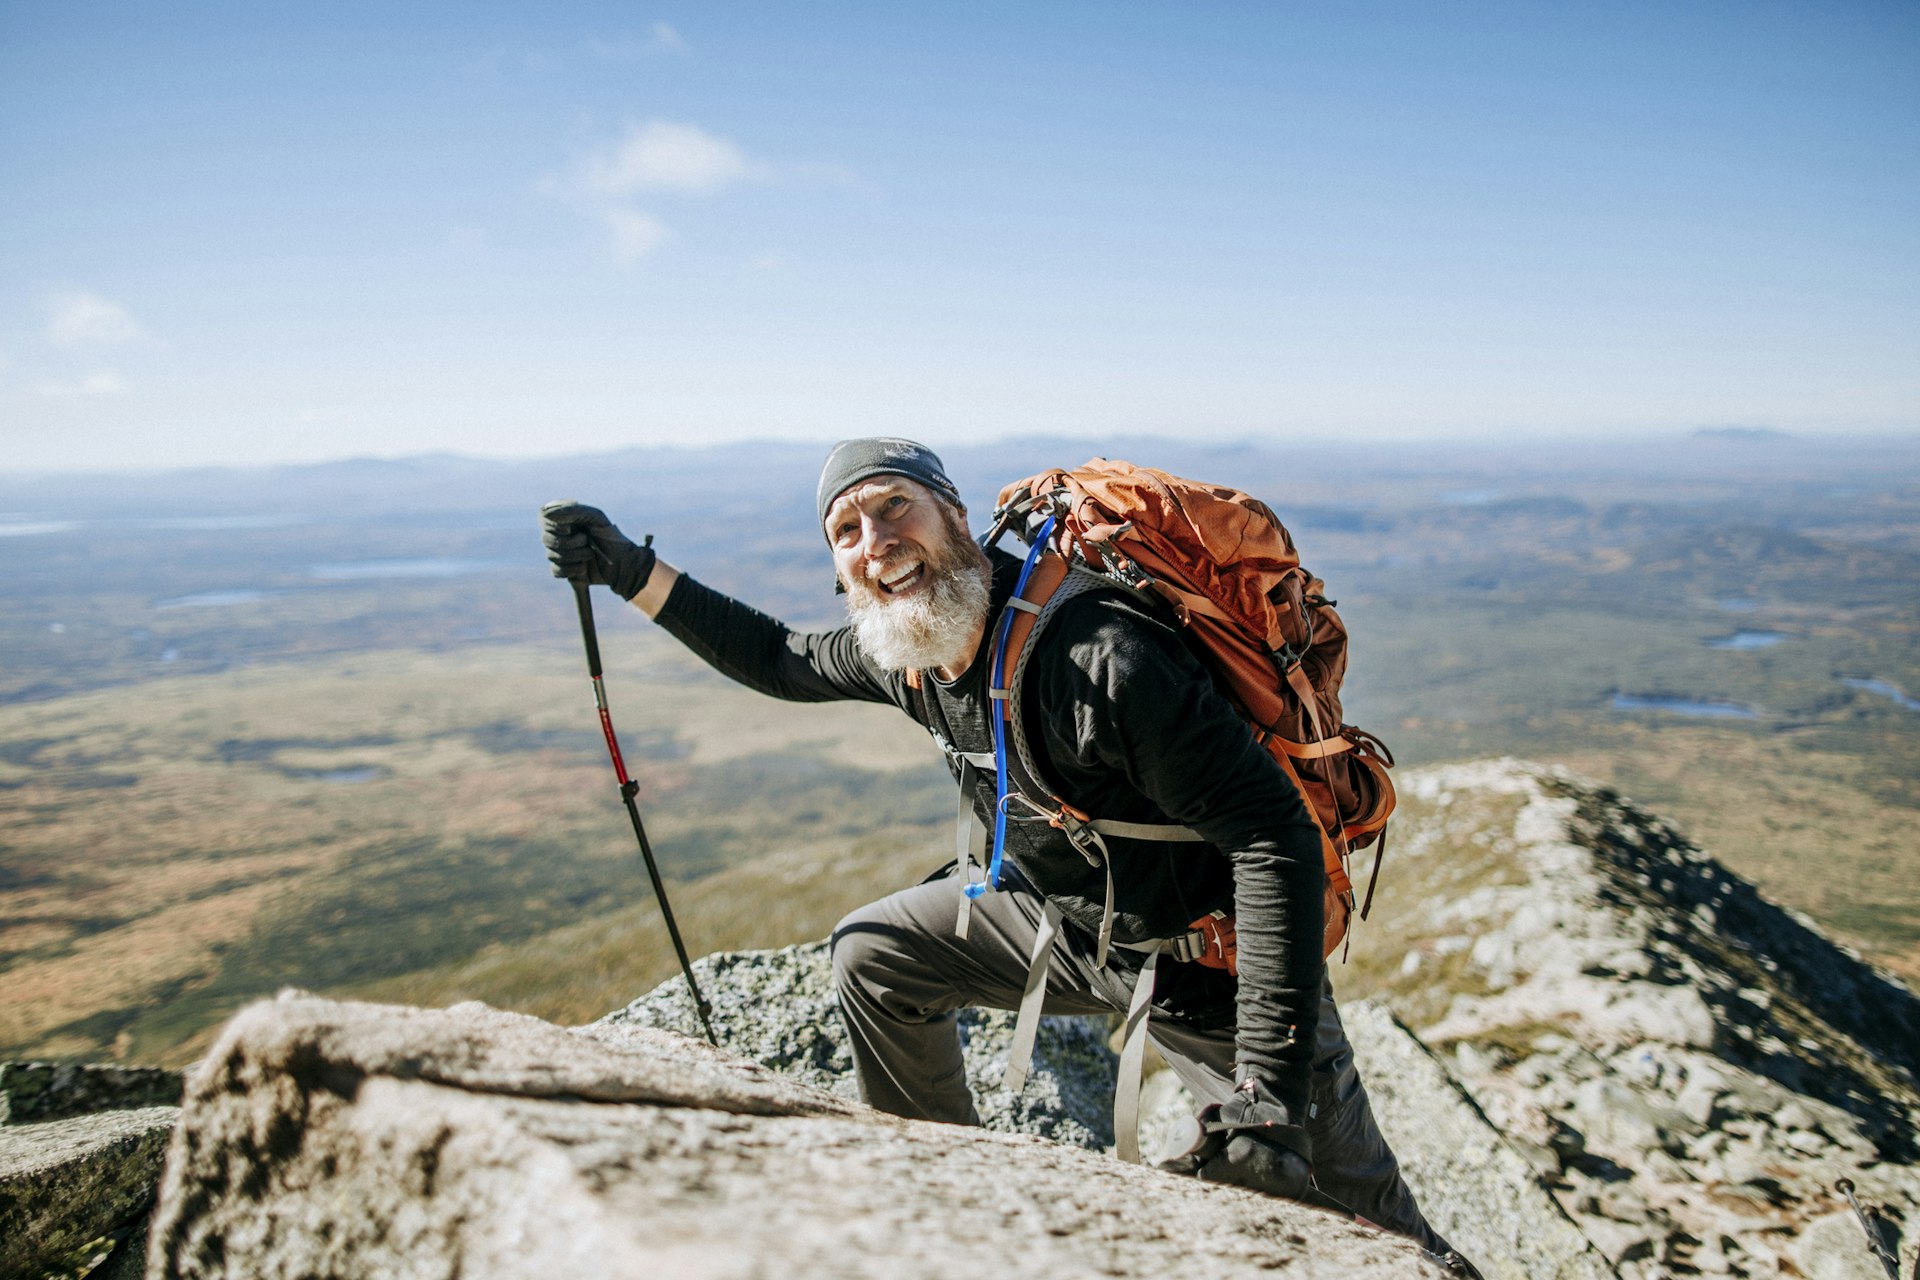 An older, bearded white man in hiking gear climbs over some rocks on a mountain in Maine, New England